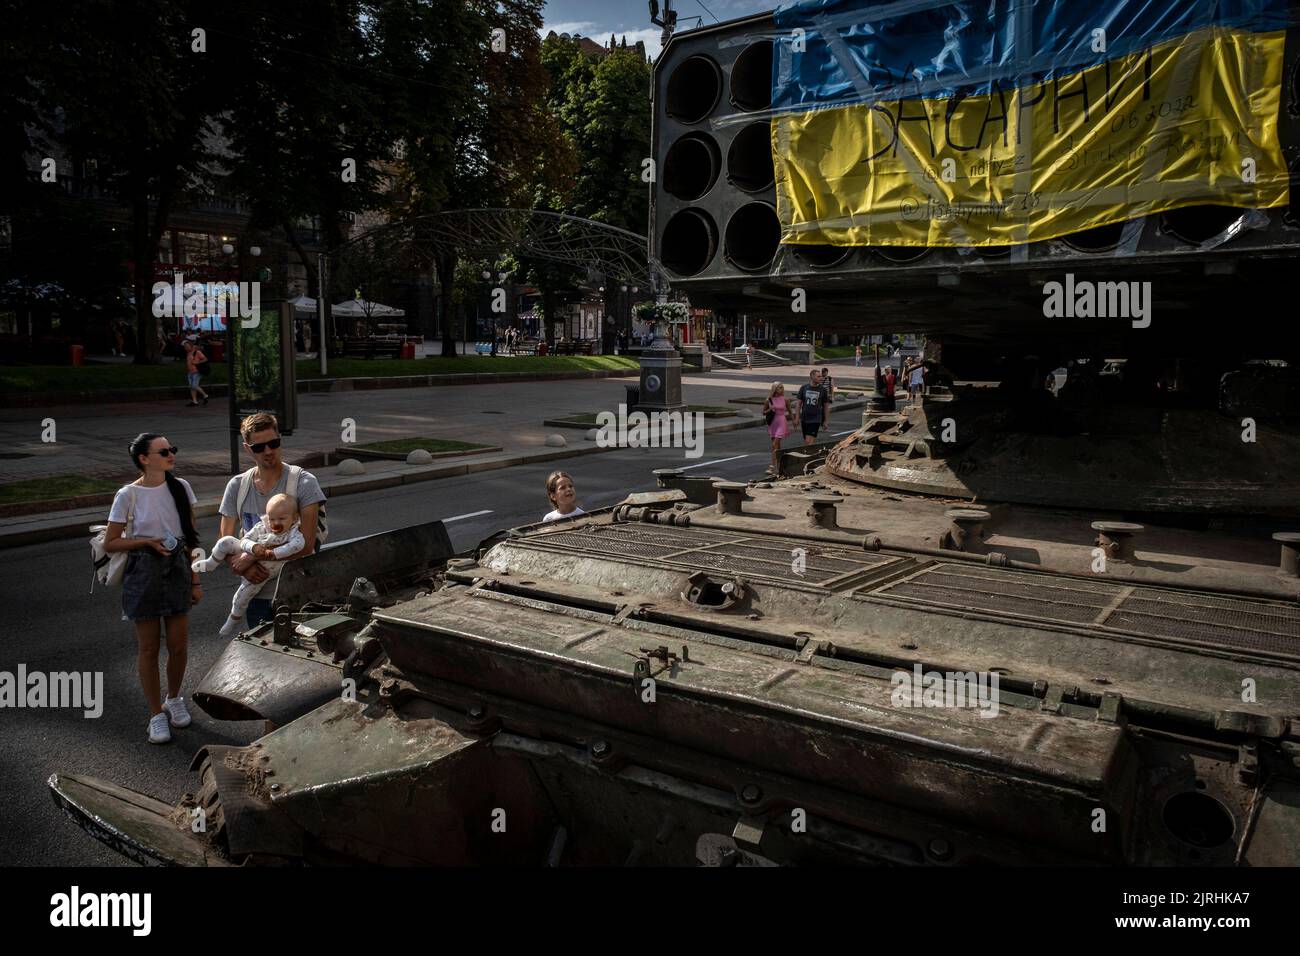 Kyiv, Ukraine. 22nd Aug, 2022. A family observes the wreckage of a Russian Multi-Rocket Launch System (MLRS) vehicle with a Ukrainian national flag in Kyiv. As dedicated to the upcoming Independence Day of Ukraine, and nearly 6 months after the full-scale invasion of Ukraine on February 24, the country's capital Kyiv holds an exhibition on the main street of Khreschaytk Street showing multiple destroyed military equipment, tanks and weapons from The Armed Forces of The Russian Federation (AFRF).As the Russian full invasion of Ukraine started on February 24, the war that has killed numerous c Stock Photo